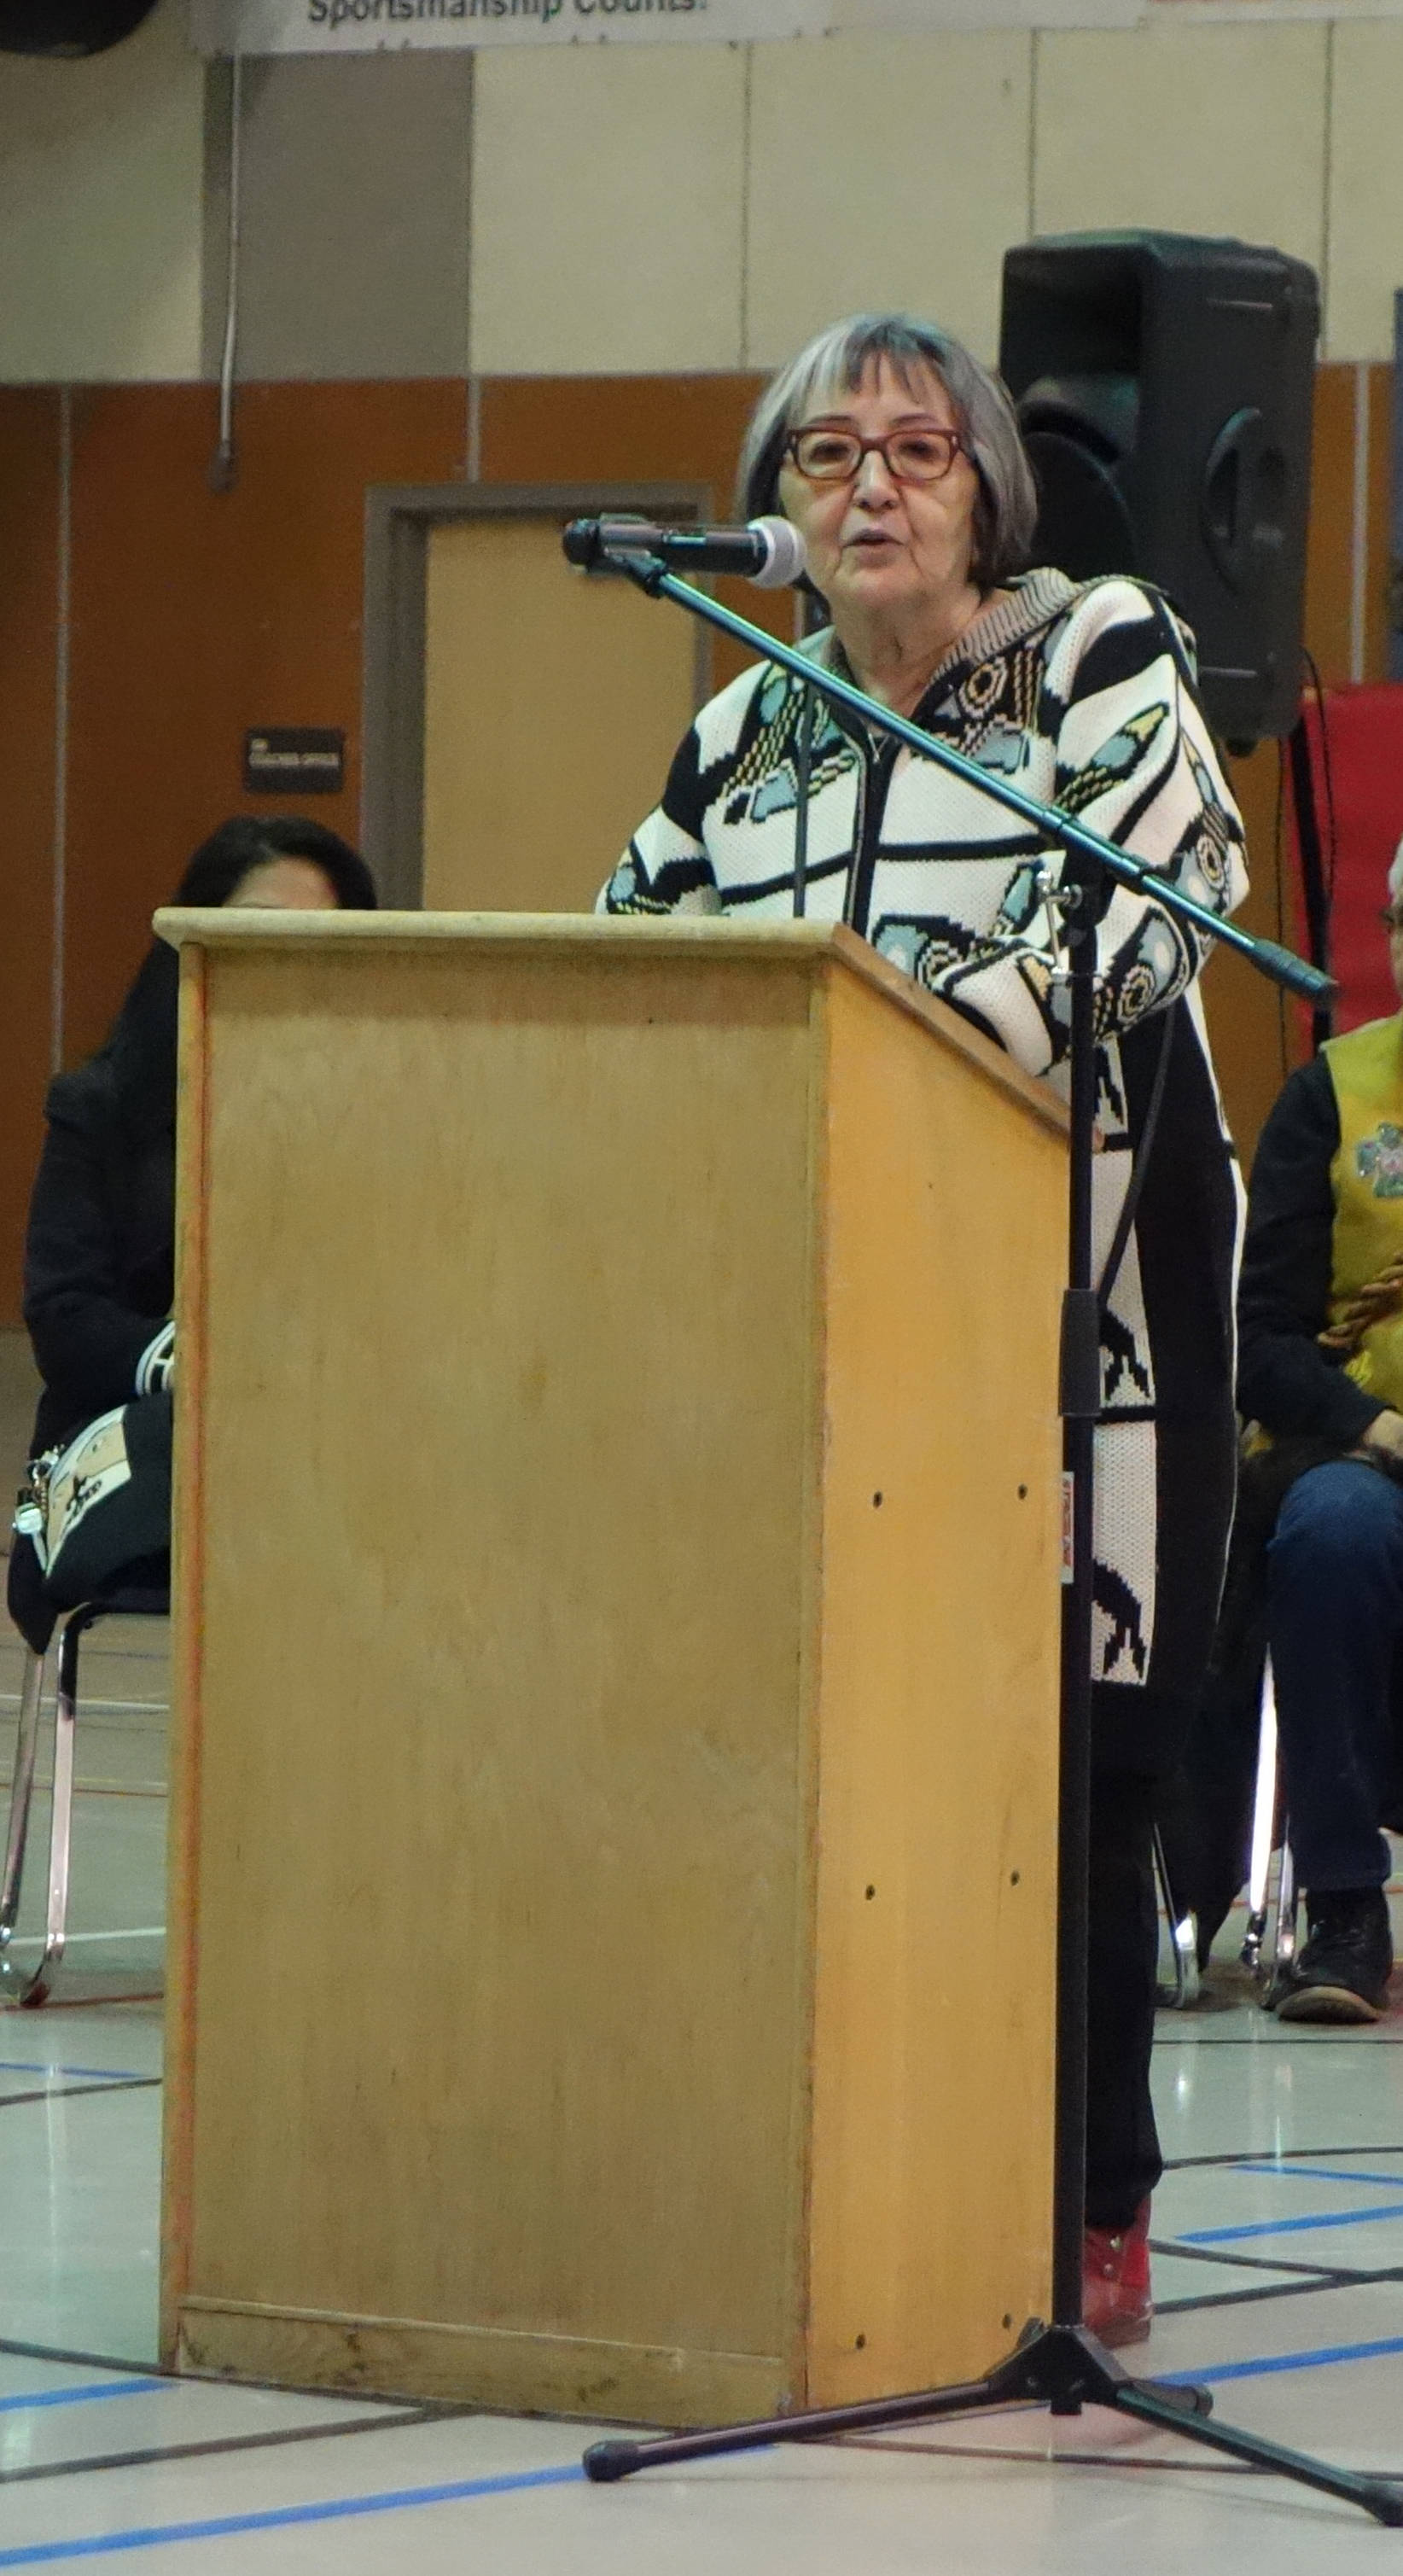 President of Sealaska Heritage Rosita Worl of the Shangukeidi Clan speaks at the “Transfer of Core Cultural Values Panels Ceremony” at Floyd Dryden Middle School on Wednesday, Nov. 22. (Clara Miller | Capital City Weekly)